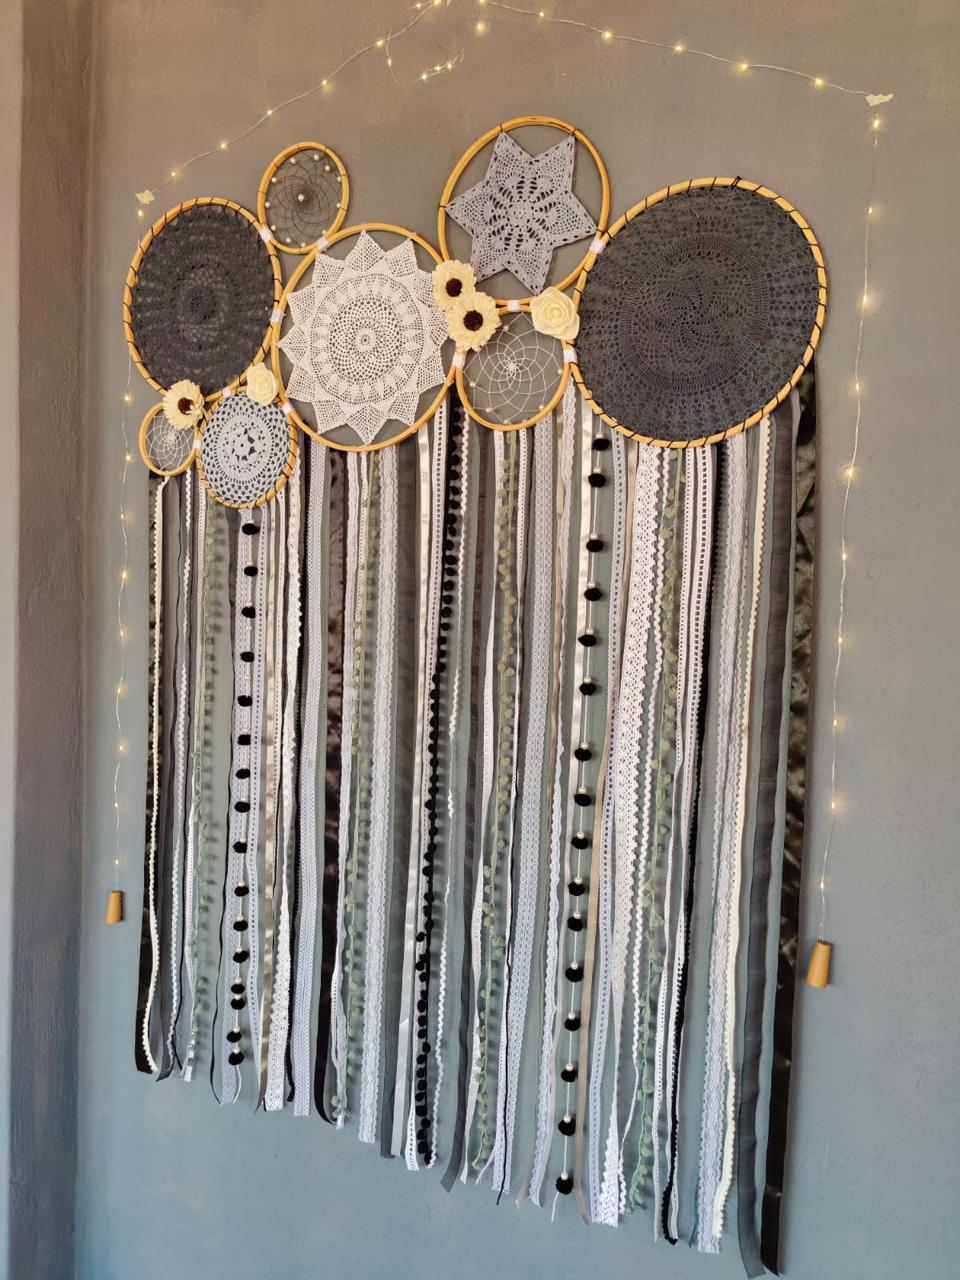 Shadow Play Crochet Lace Cluster Dreamcatcher